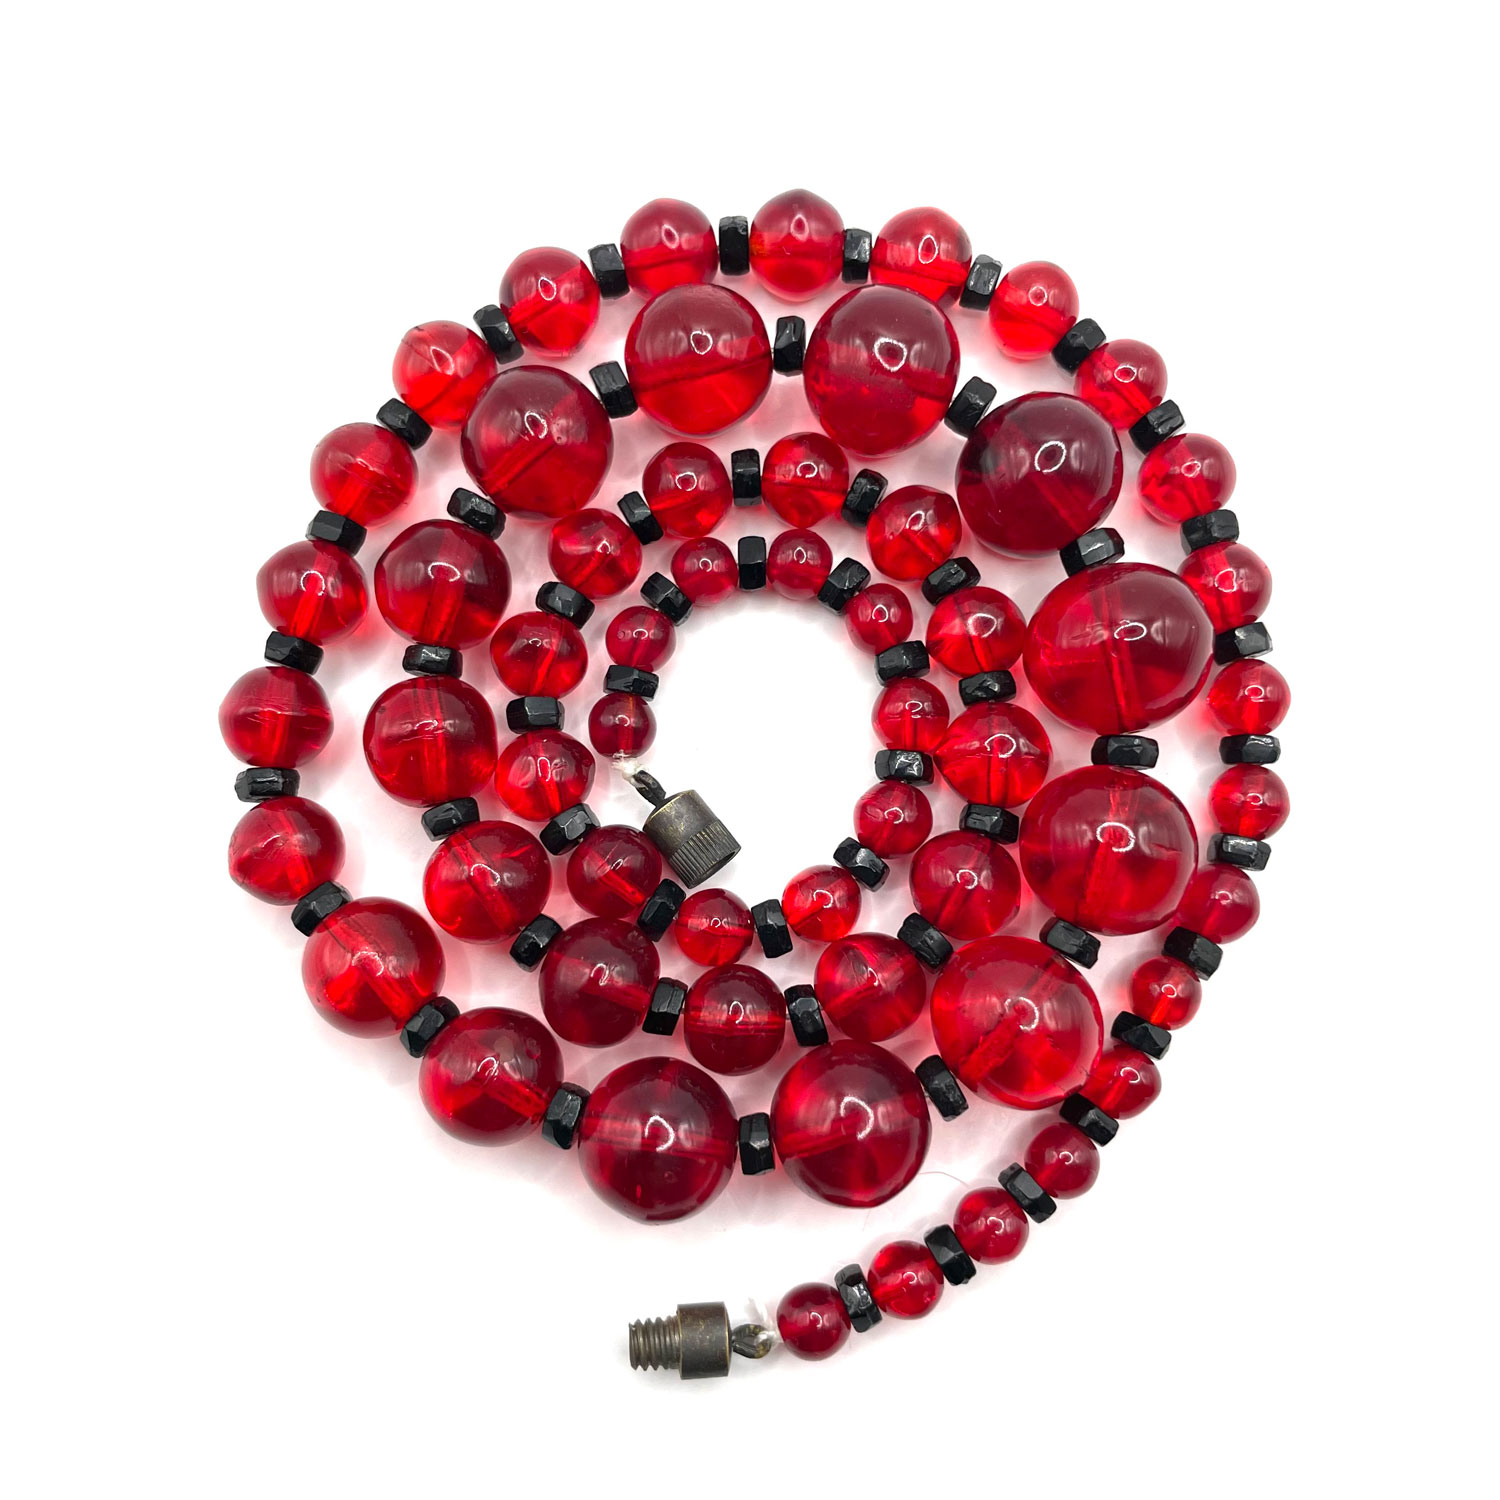 Scarlet red glass bead necklace